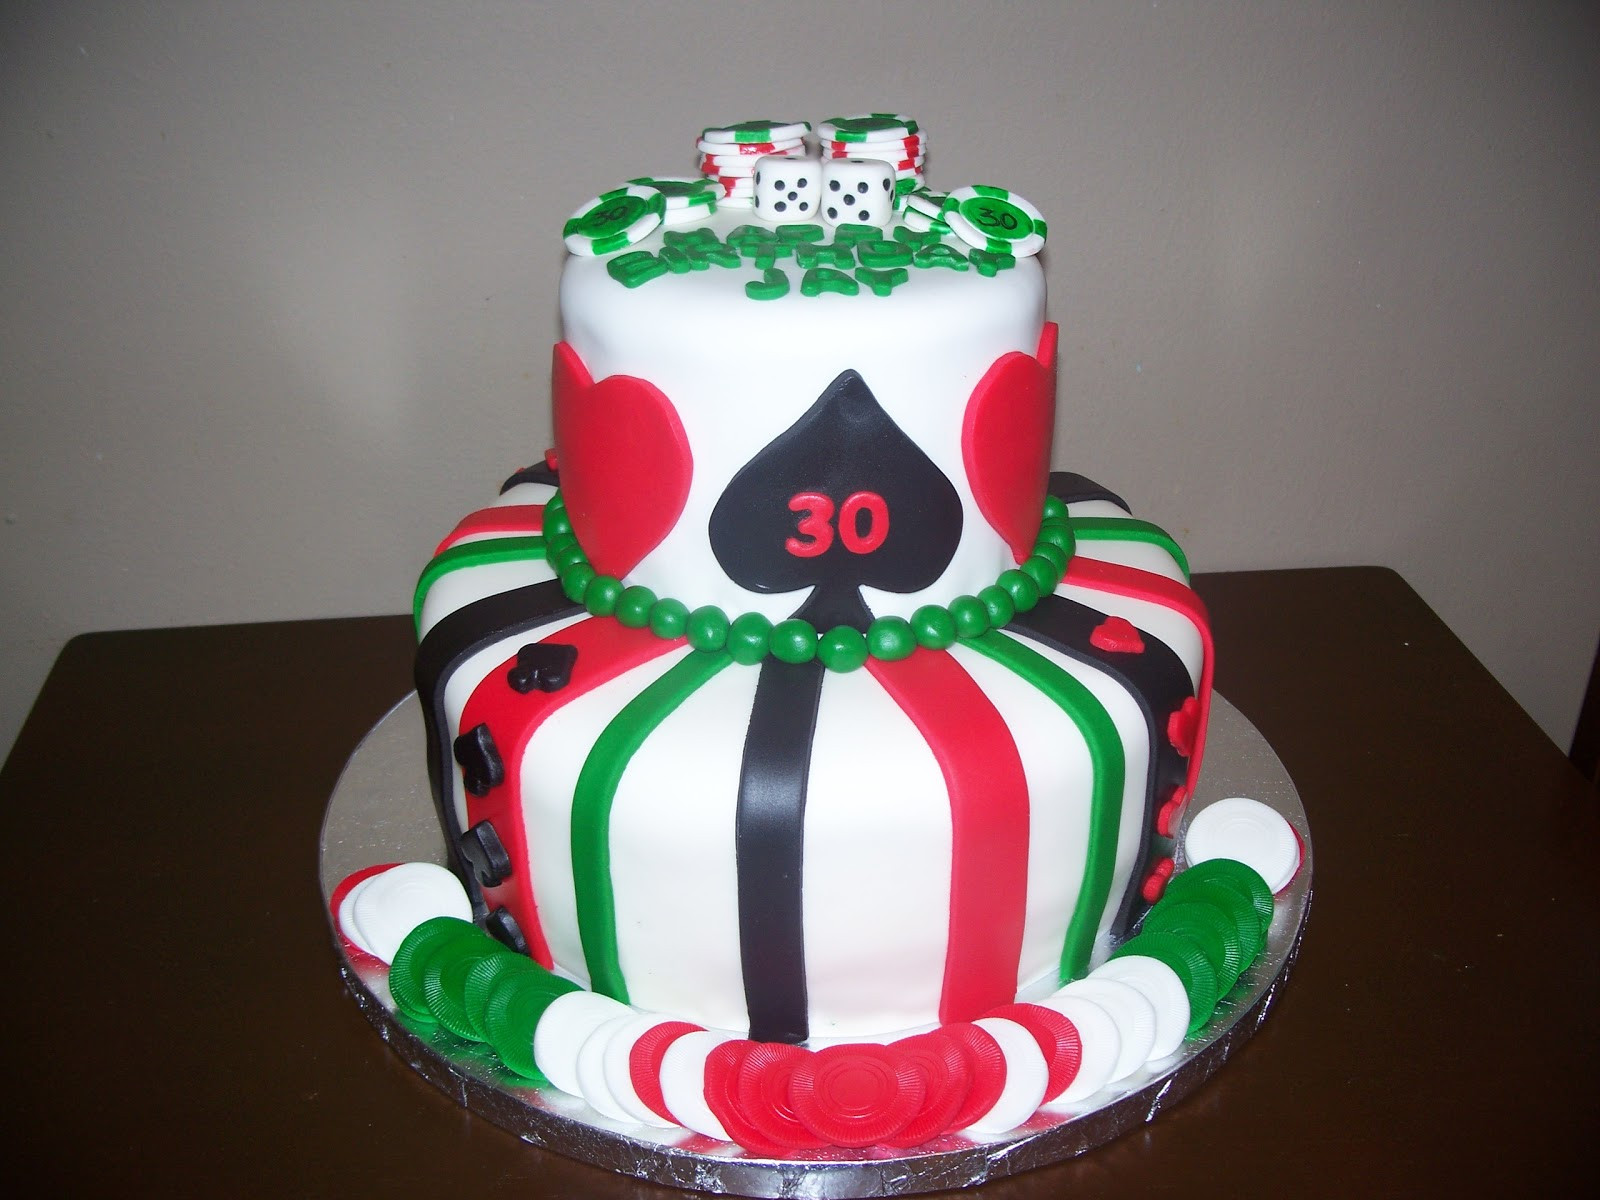 30th Birthday Cakes For Him
 SweetDaisyCakes Poker themed 30th birthday cake